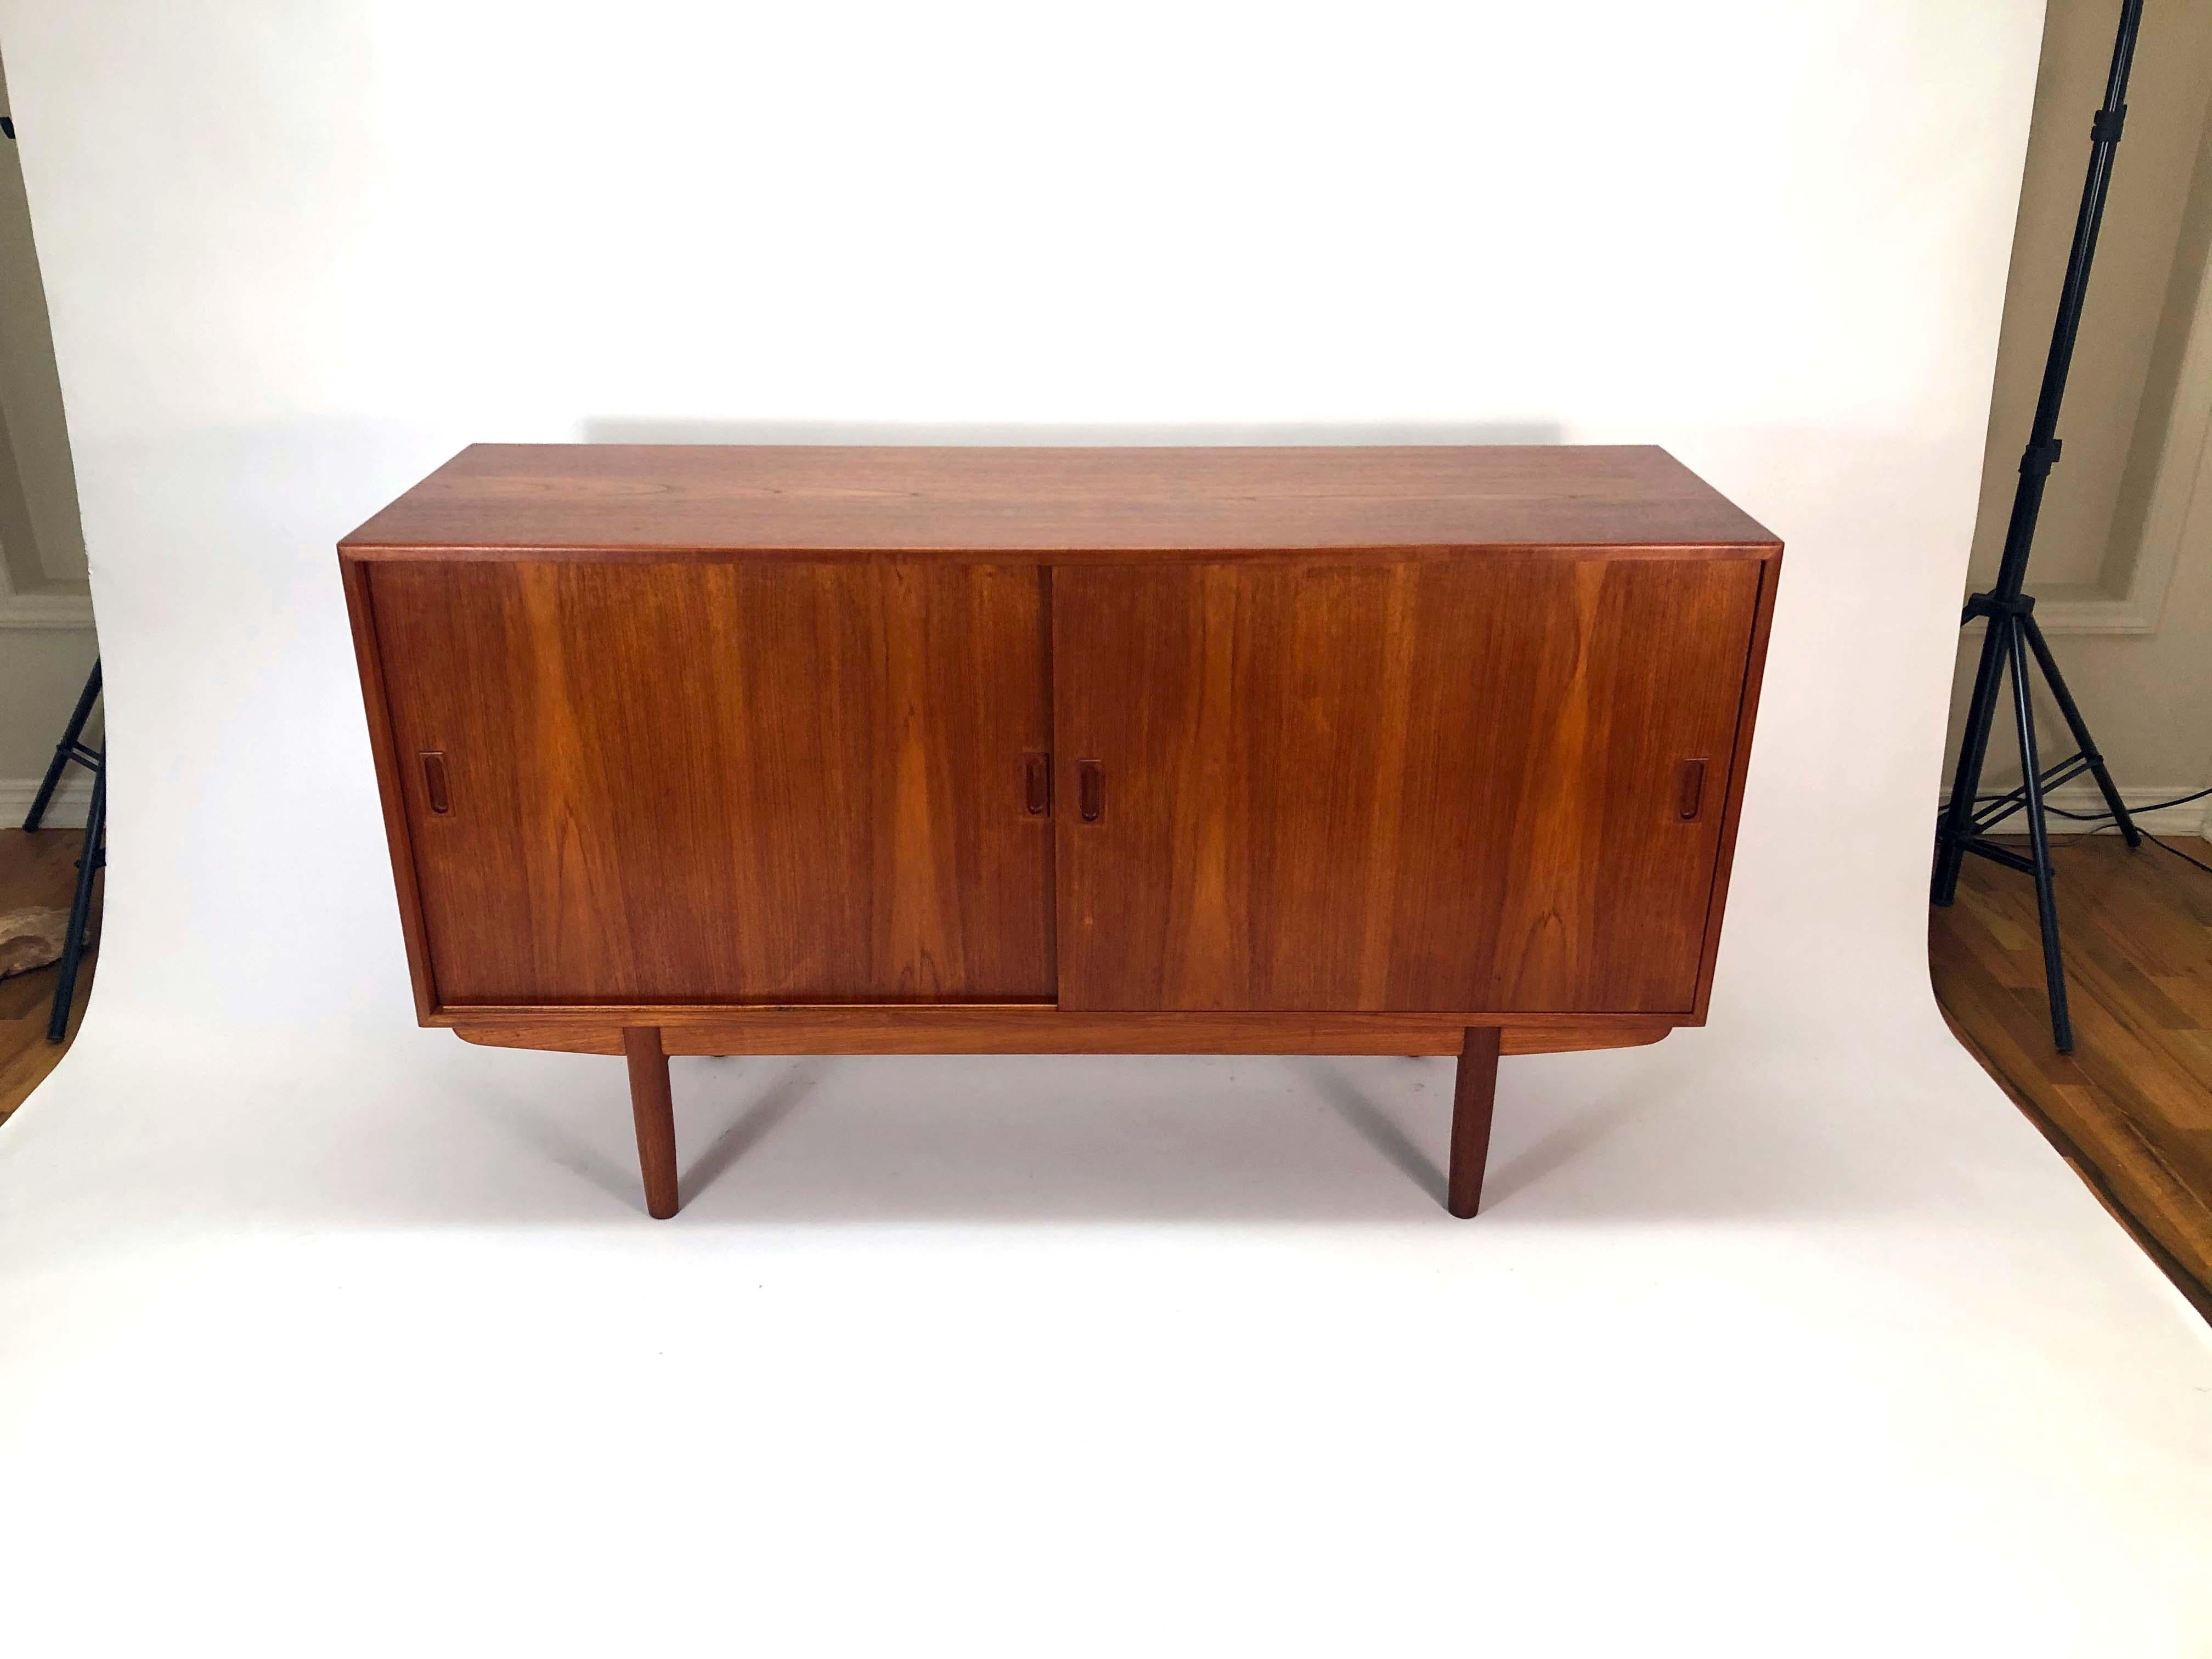 A beautifully-grained Mid-Century teak credenza by Børge Mogensen for Søborg Møbelfabrik. Denmark, 1960s.

Beautiful teak graining. Excellent vintage condition.

2 adjustable shelves. The drawers have extra rails, allowing them to also adjust in